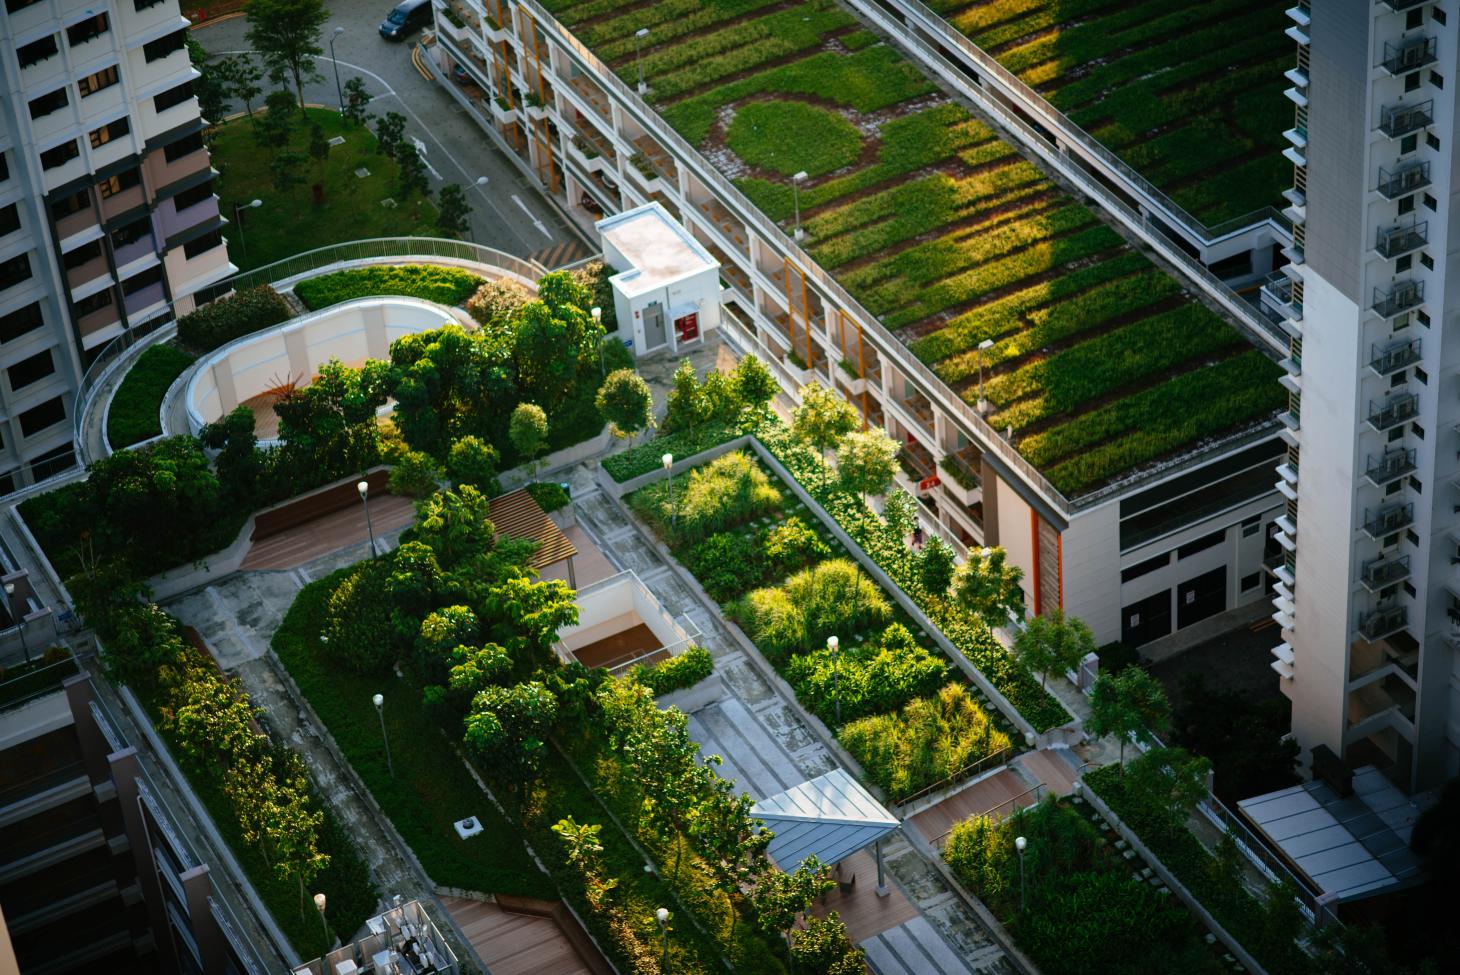 Aerial view of rooftop gardens on buildings 